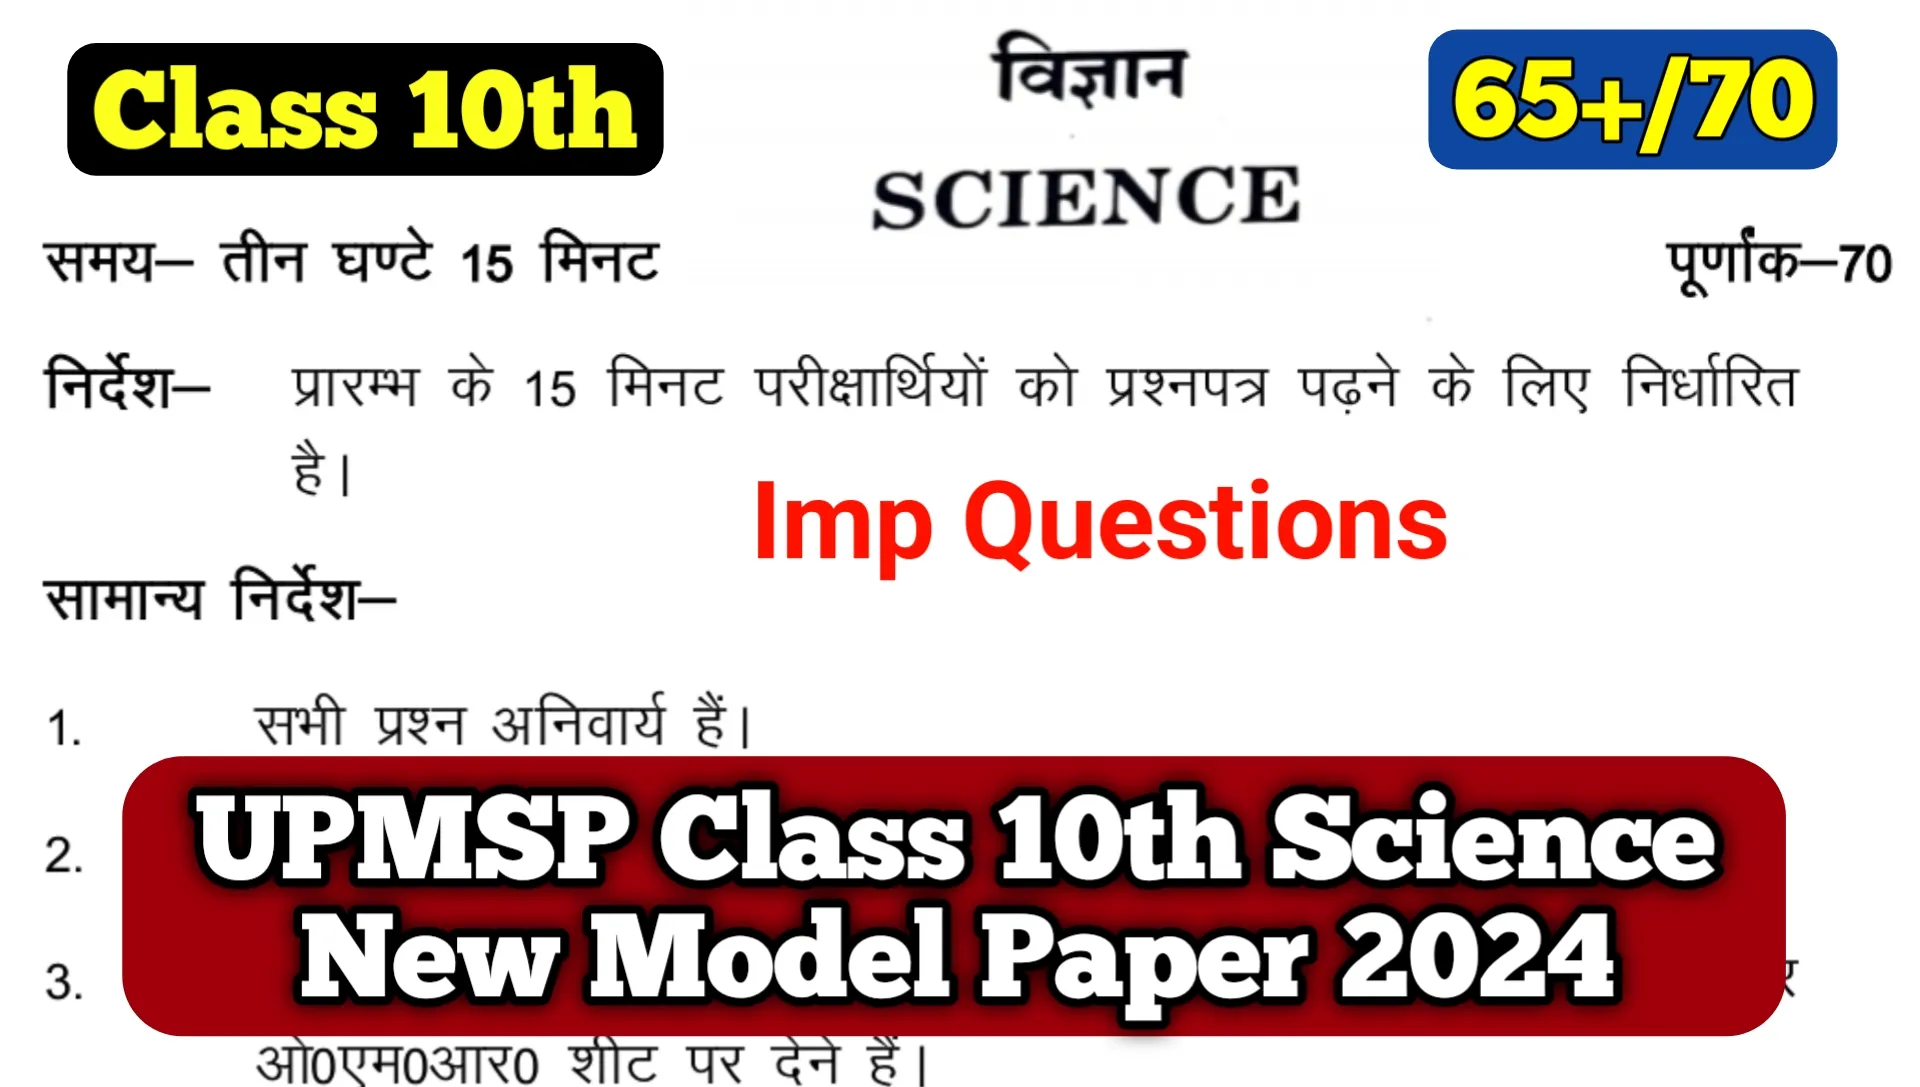 UPMSP Class 10th Science New Model Paper 2024